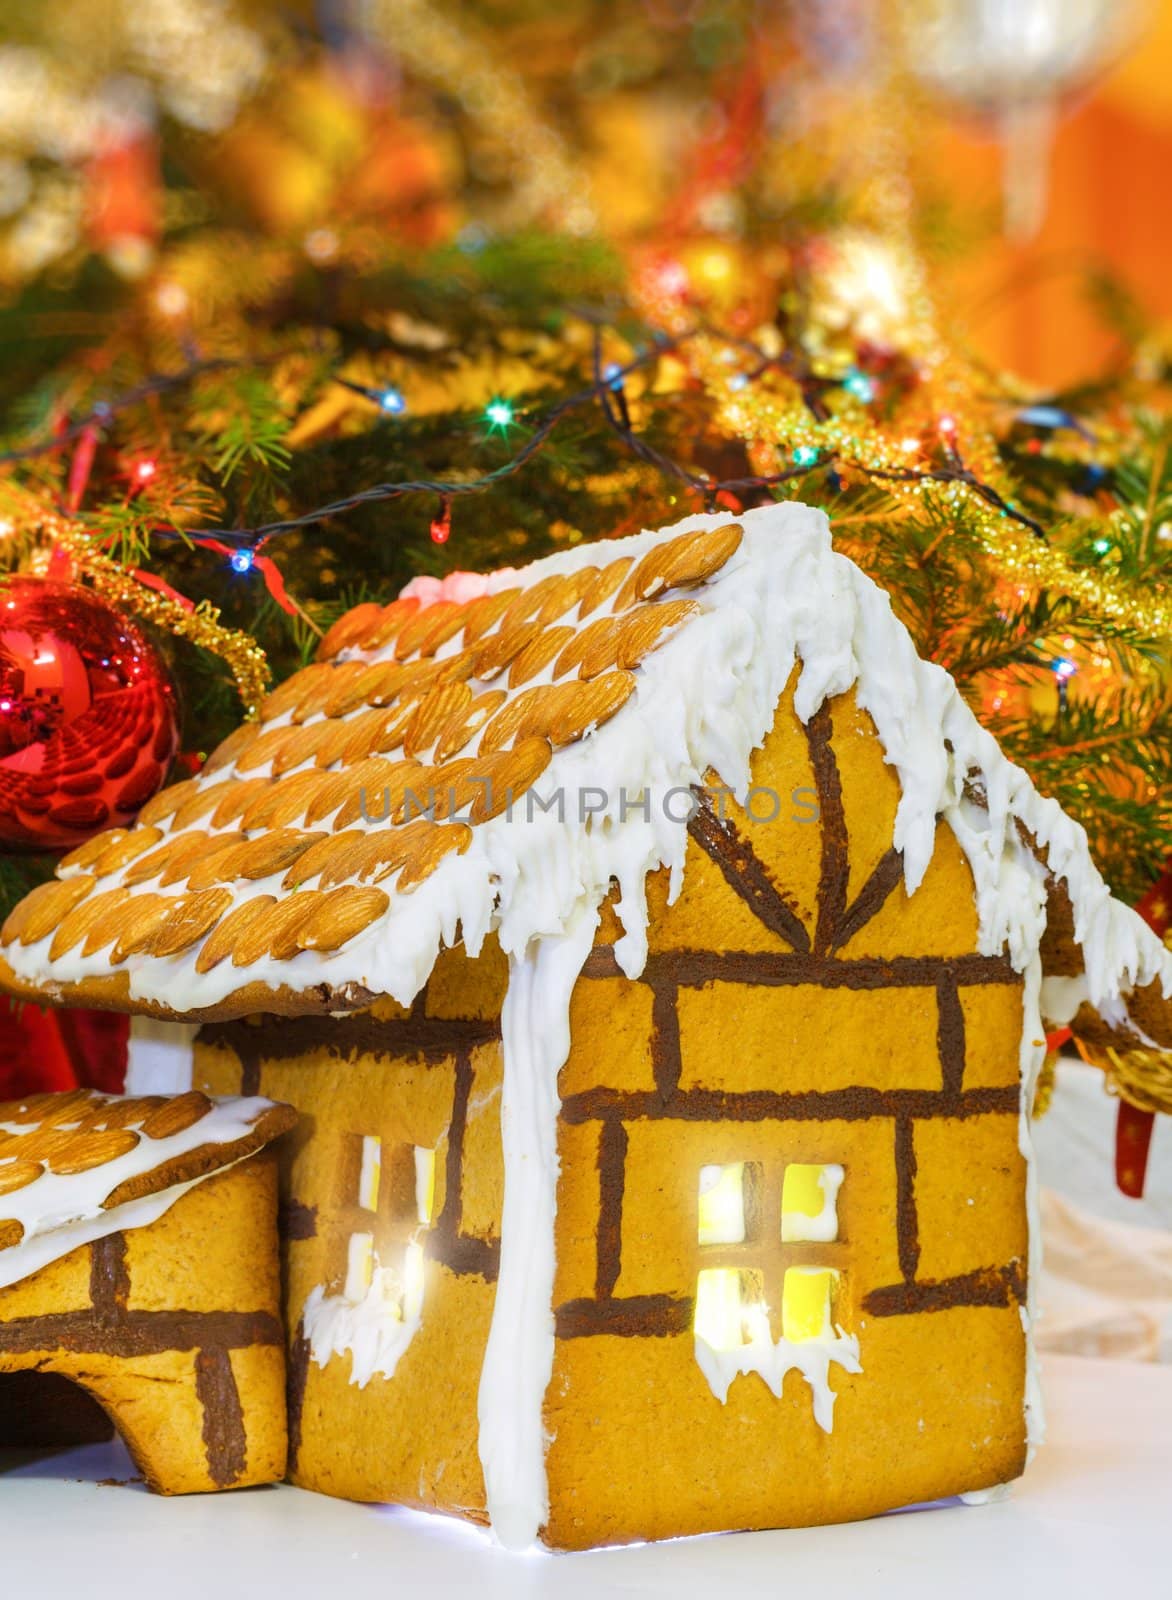 Christmas gingerbread house decoration on background of defocused christmas tree. Hand decorated. Vertical view